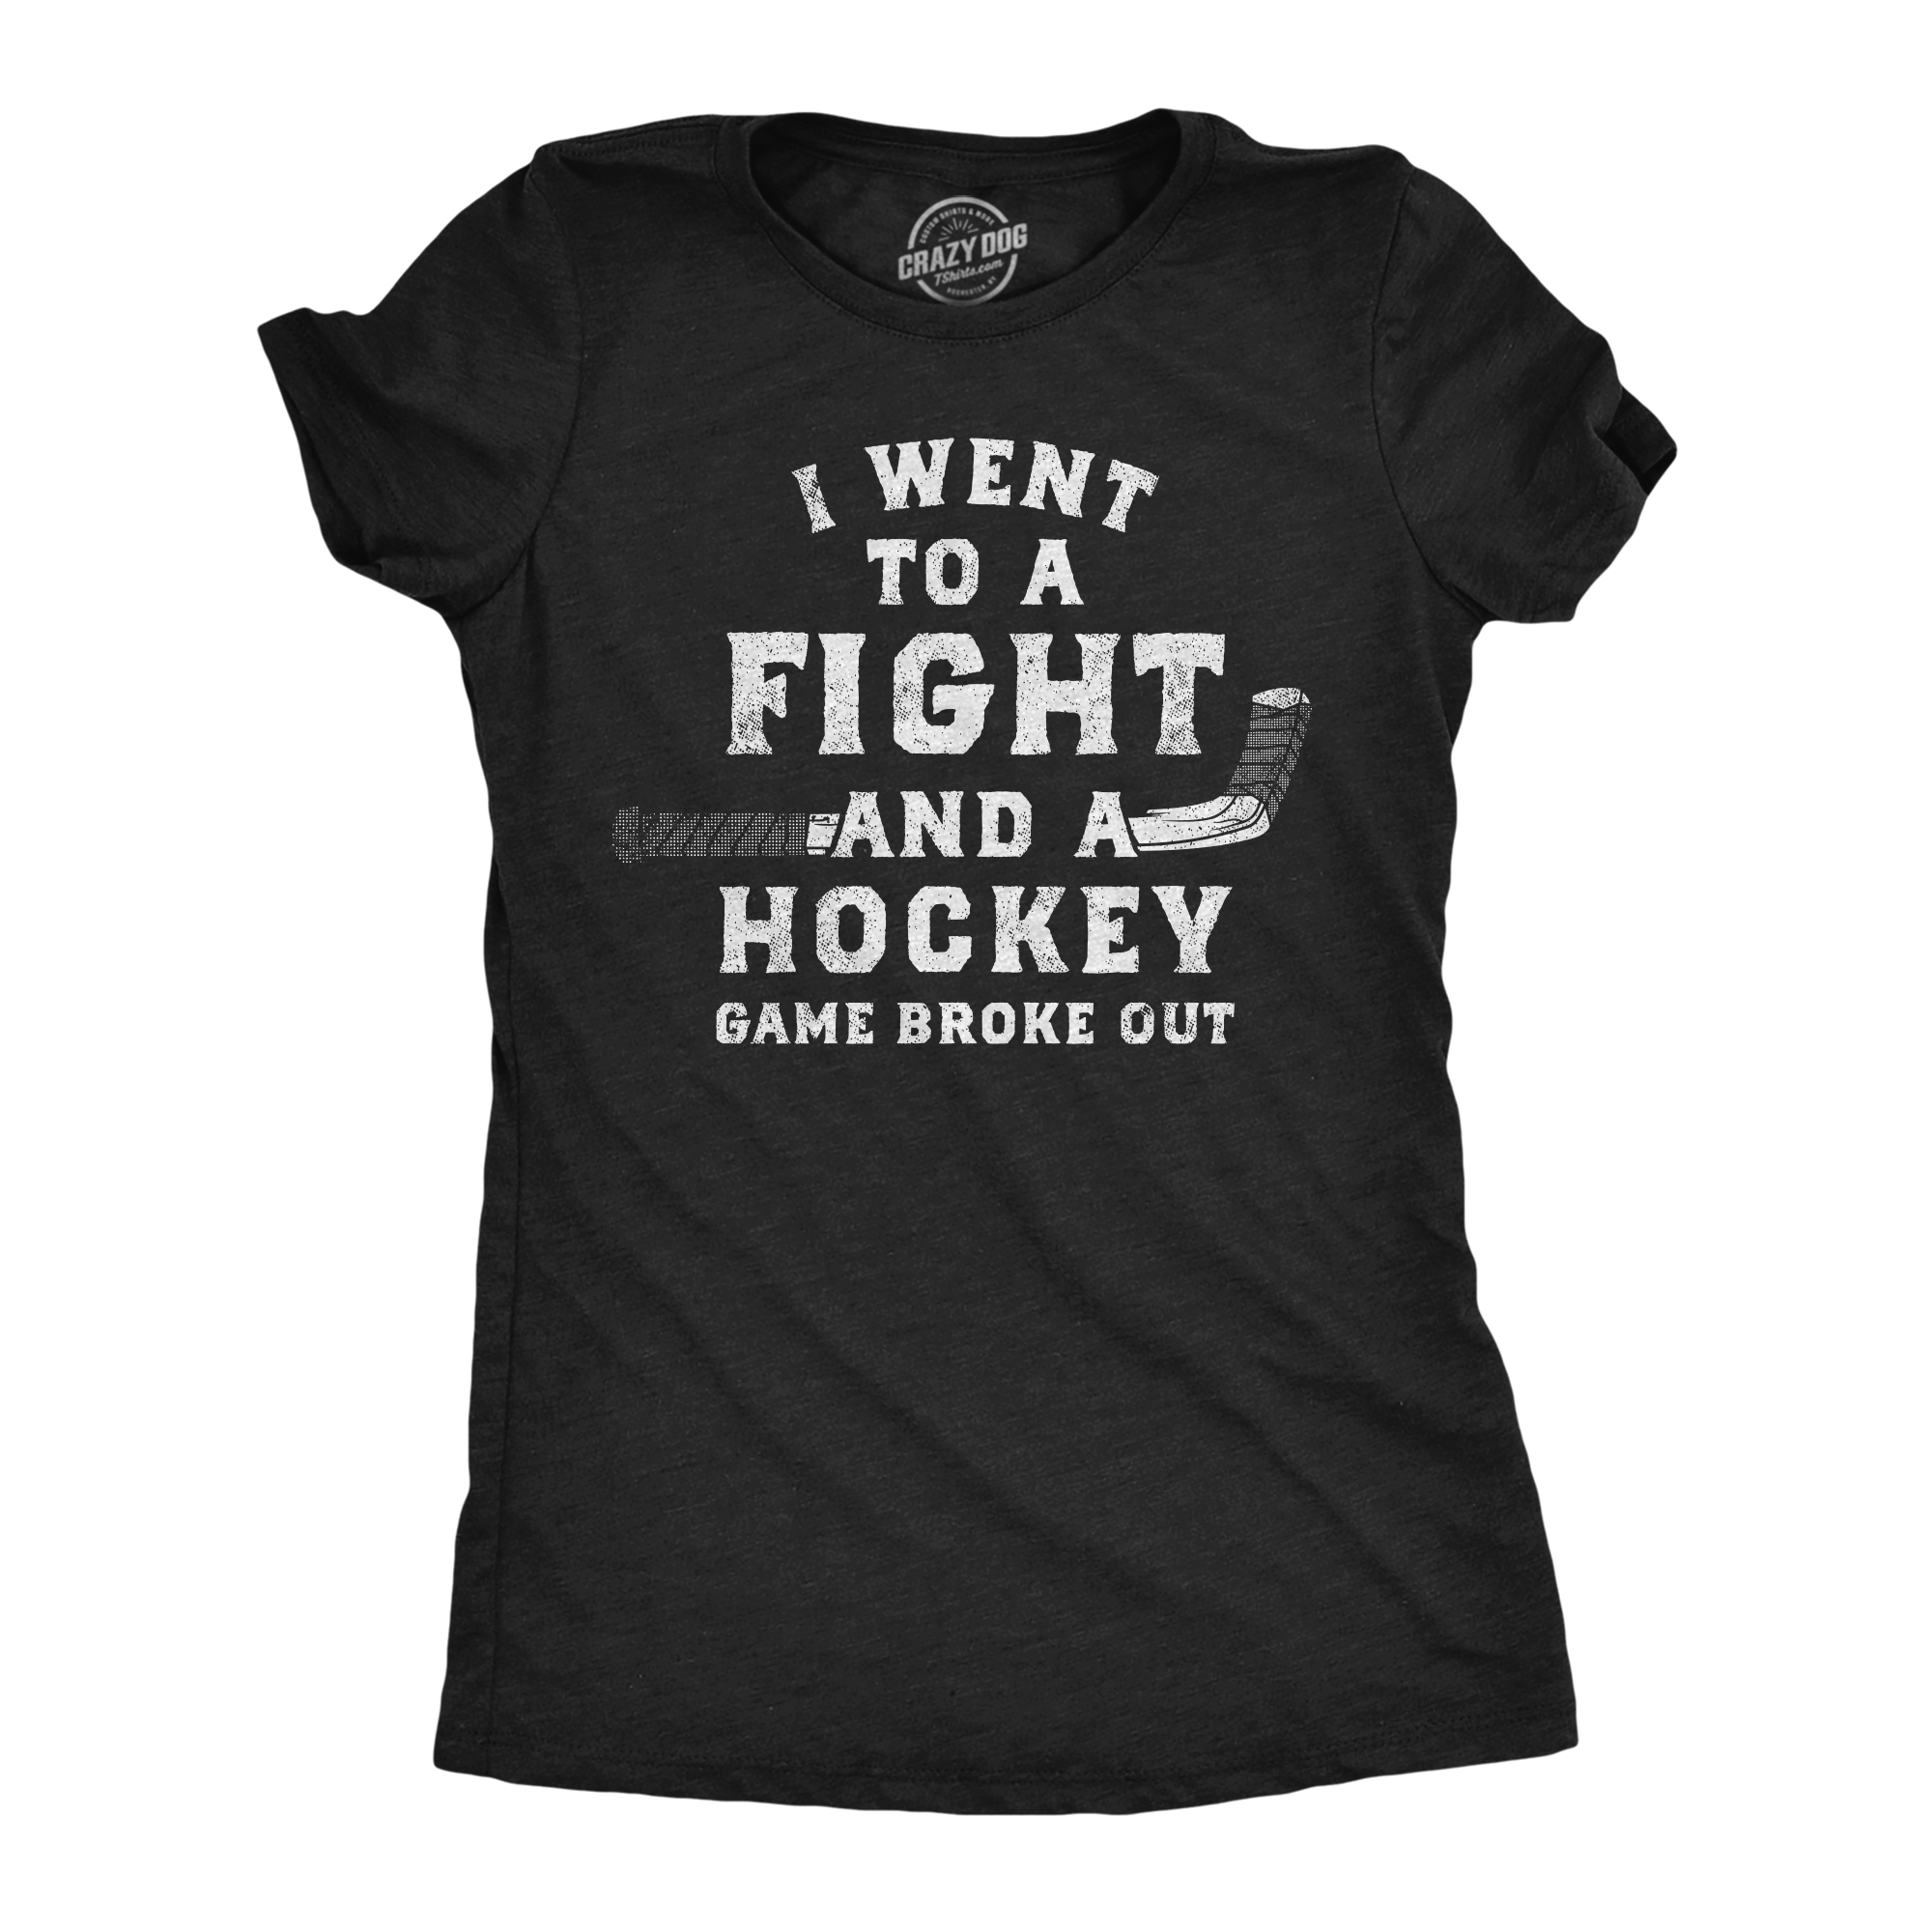 Funny Heather Black - Fight Hockey I Went To A Fight And A Hockey Game Broke Out Womens T Shirt Nerdy Hockey sarcastic Tee